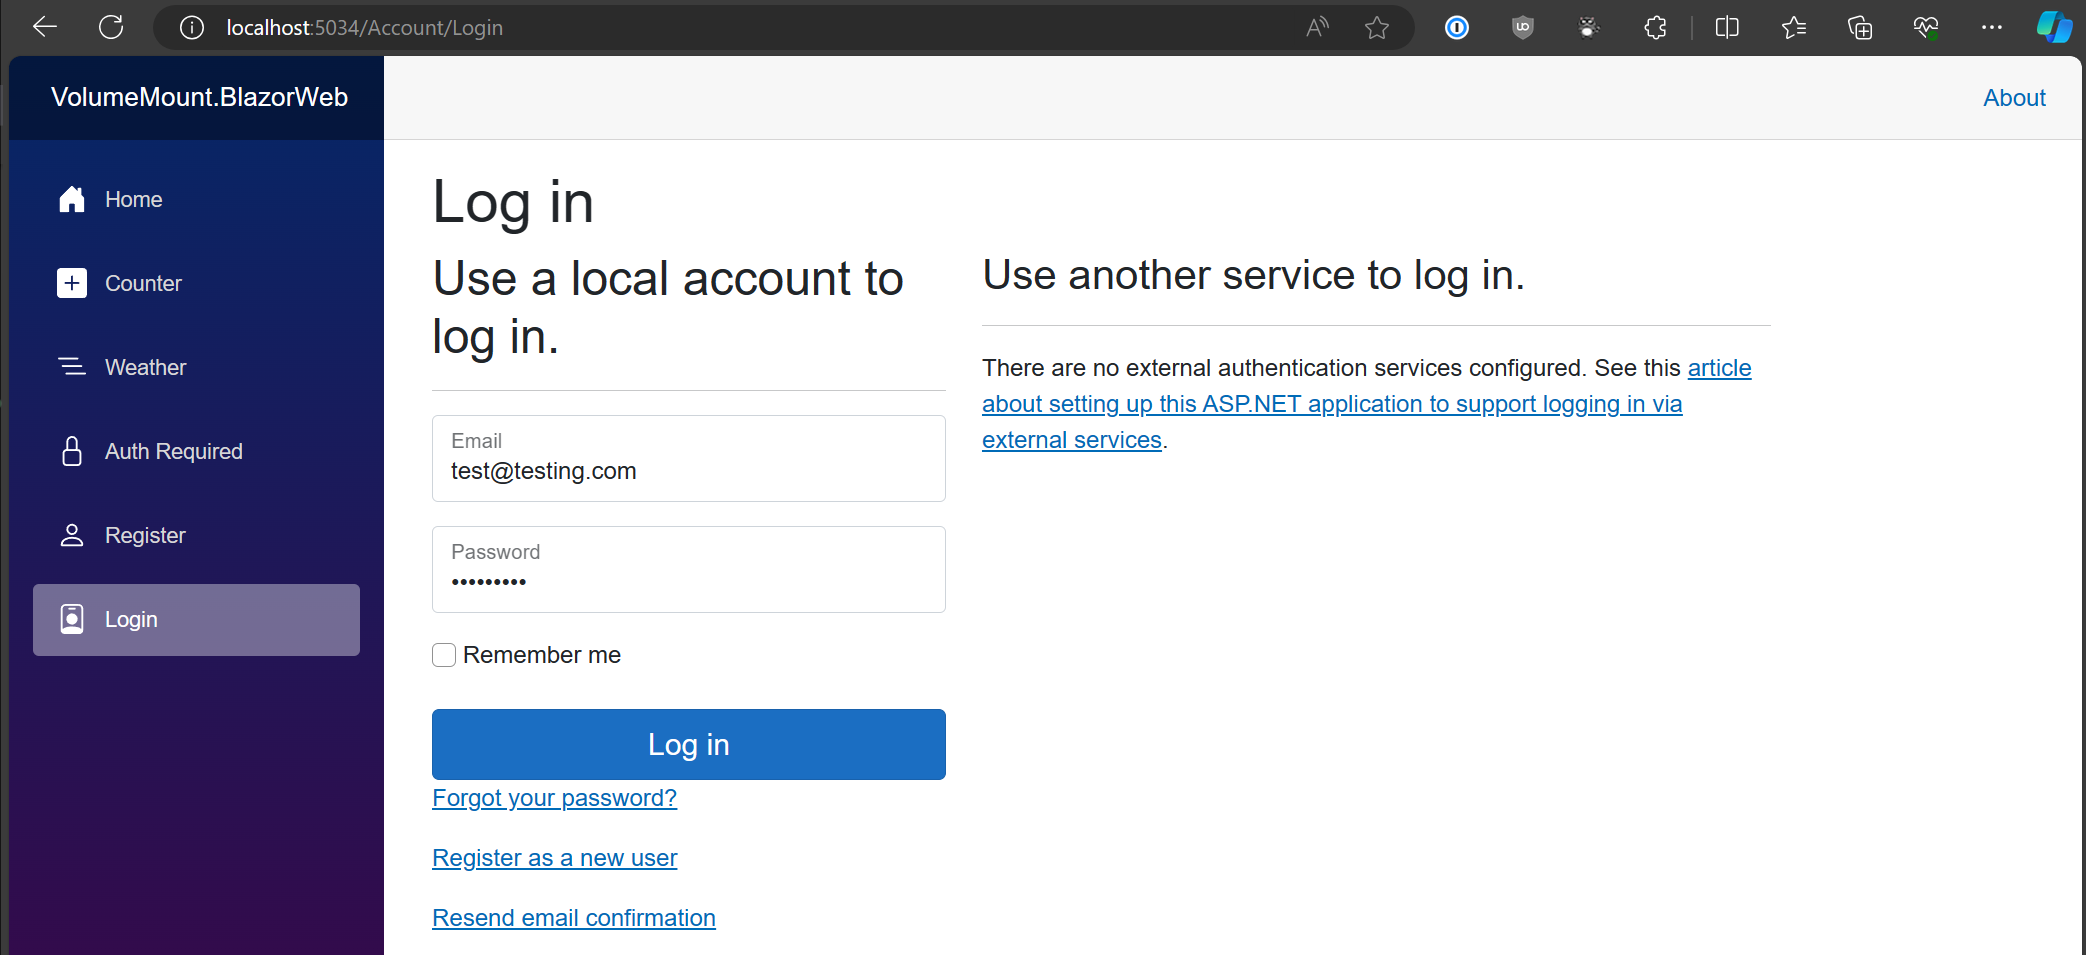 Screenshot of the account login page on the web front